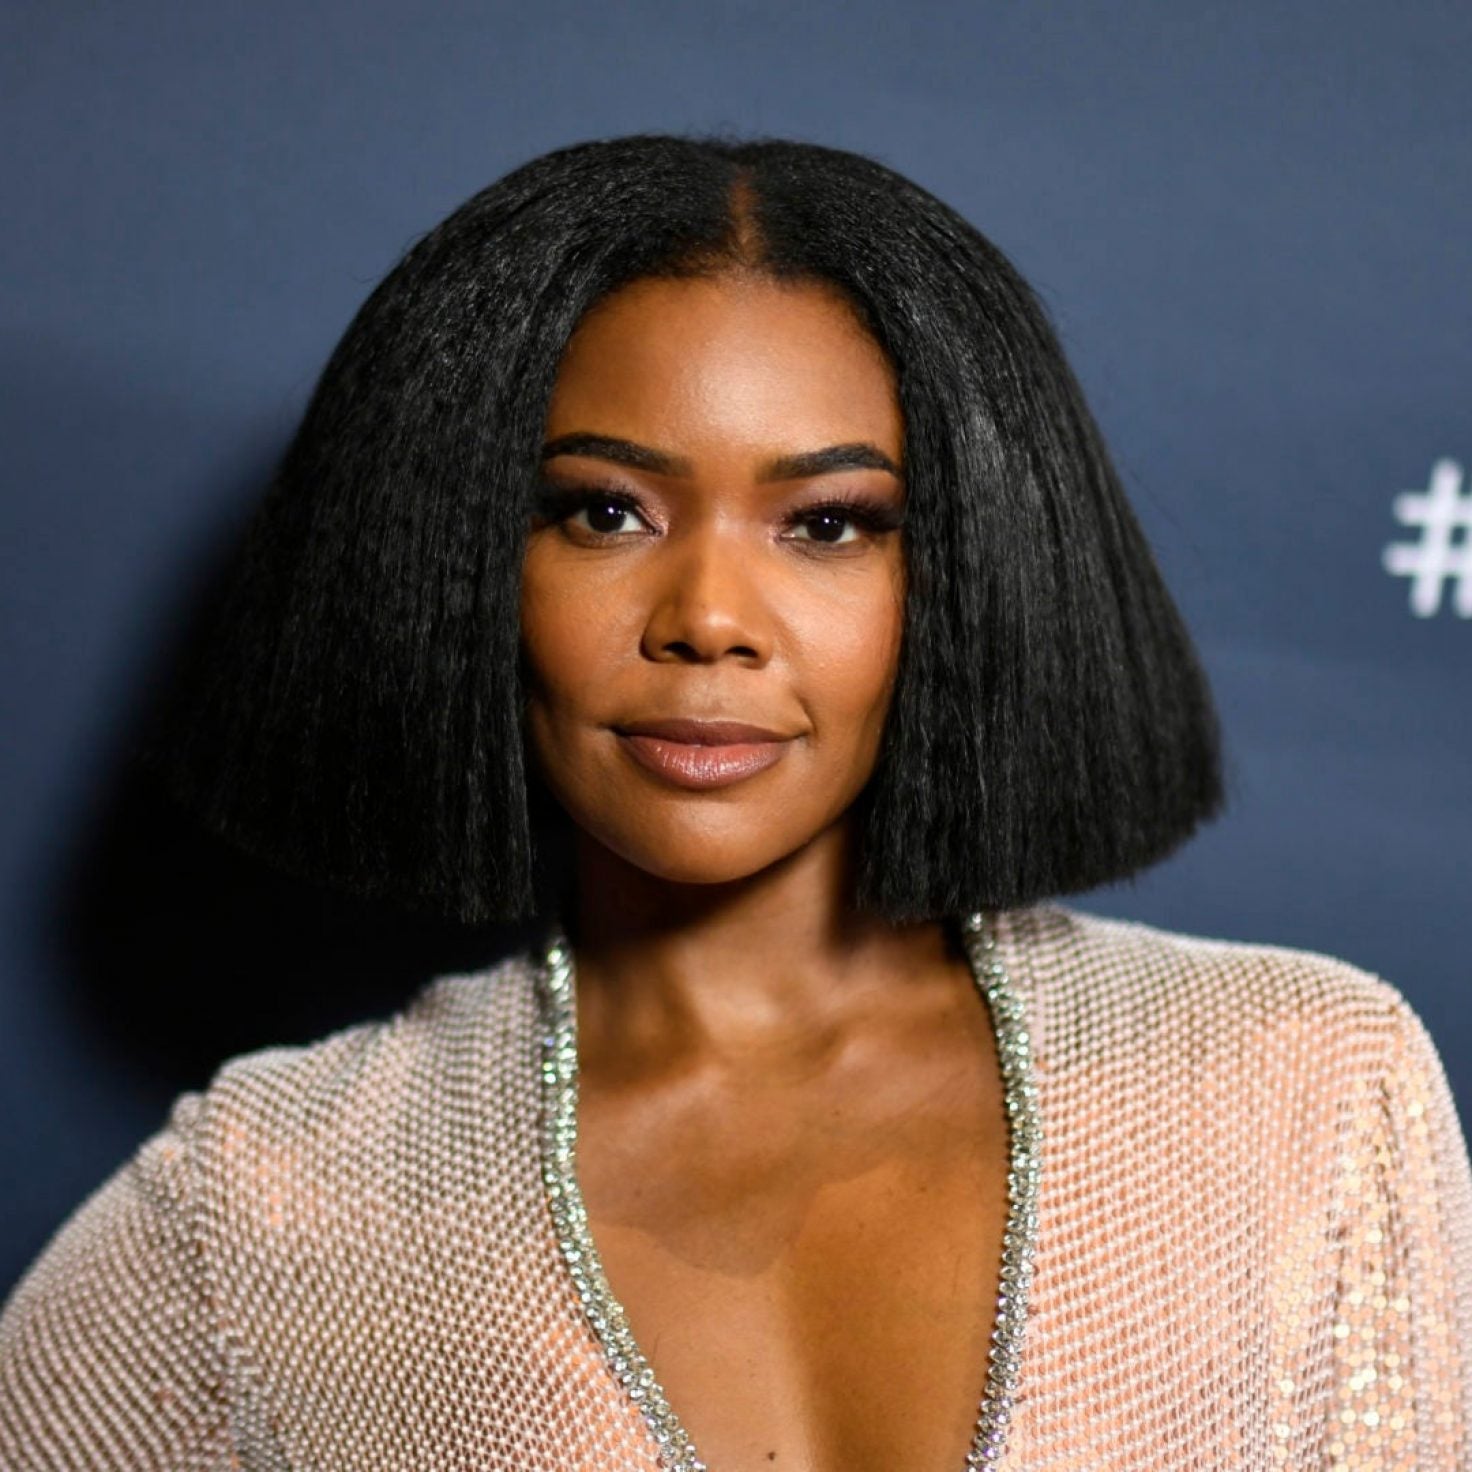 After Gabrielle Union's Firing, NBC Will Make Changes 'If Necessary'